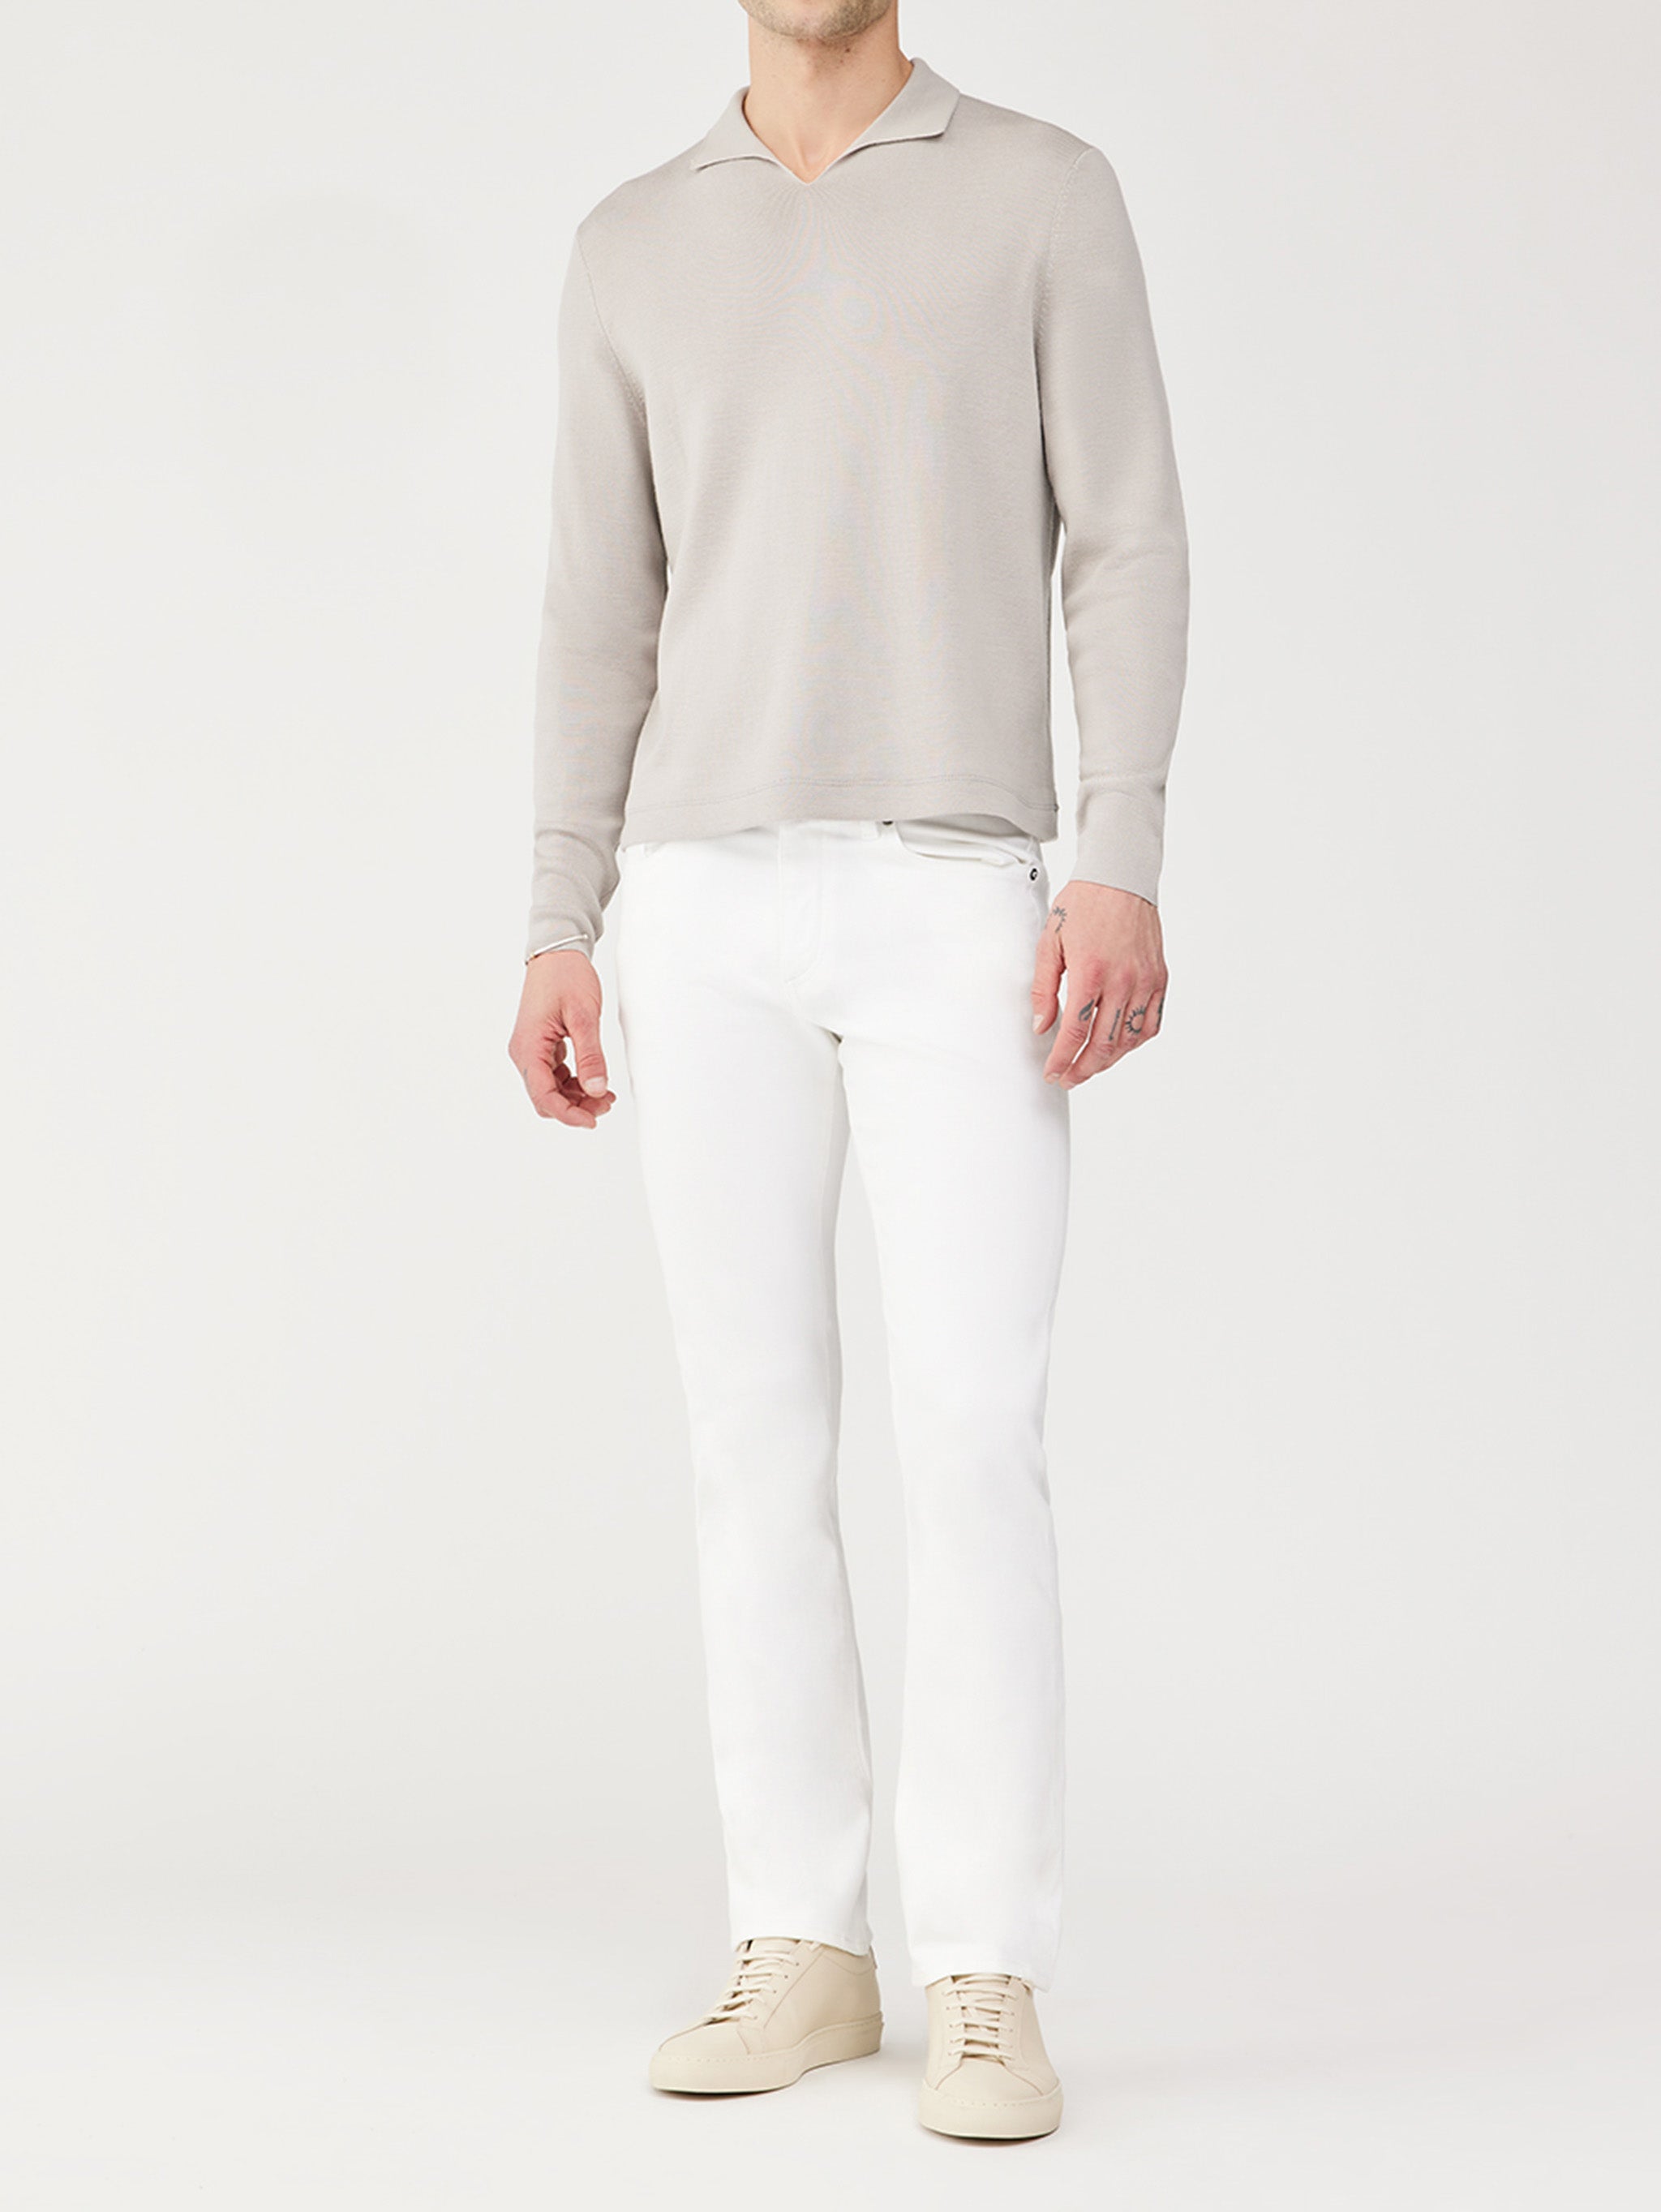 Russell Slim Straight Jeans